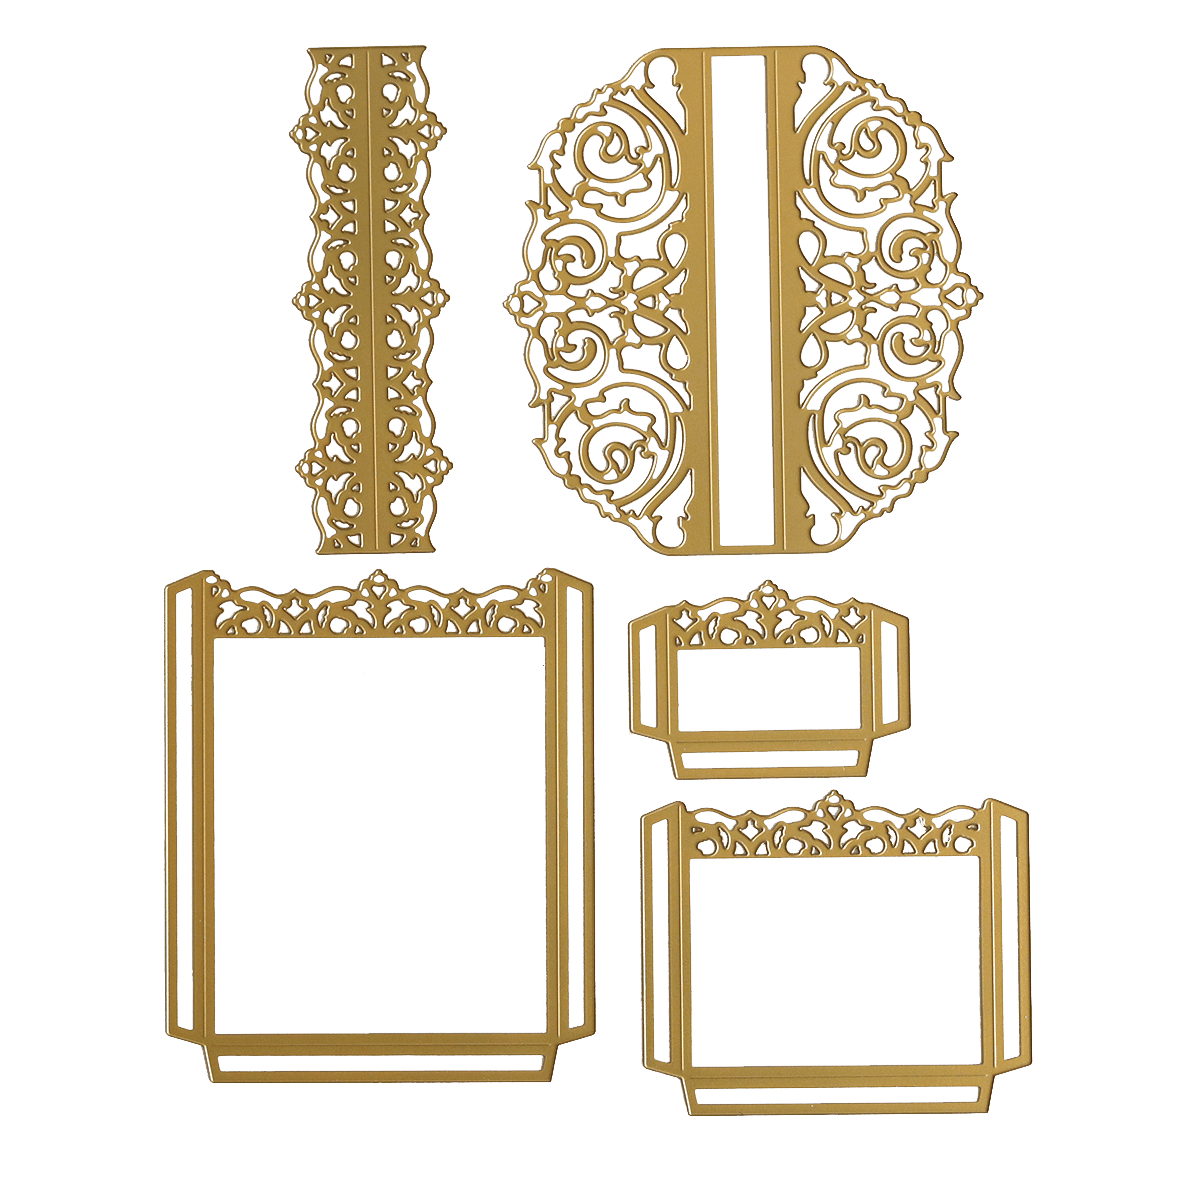 a set of four gold frames with intricate designs.